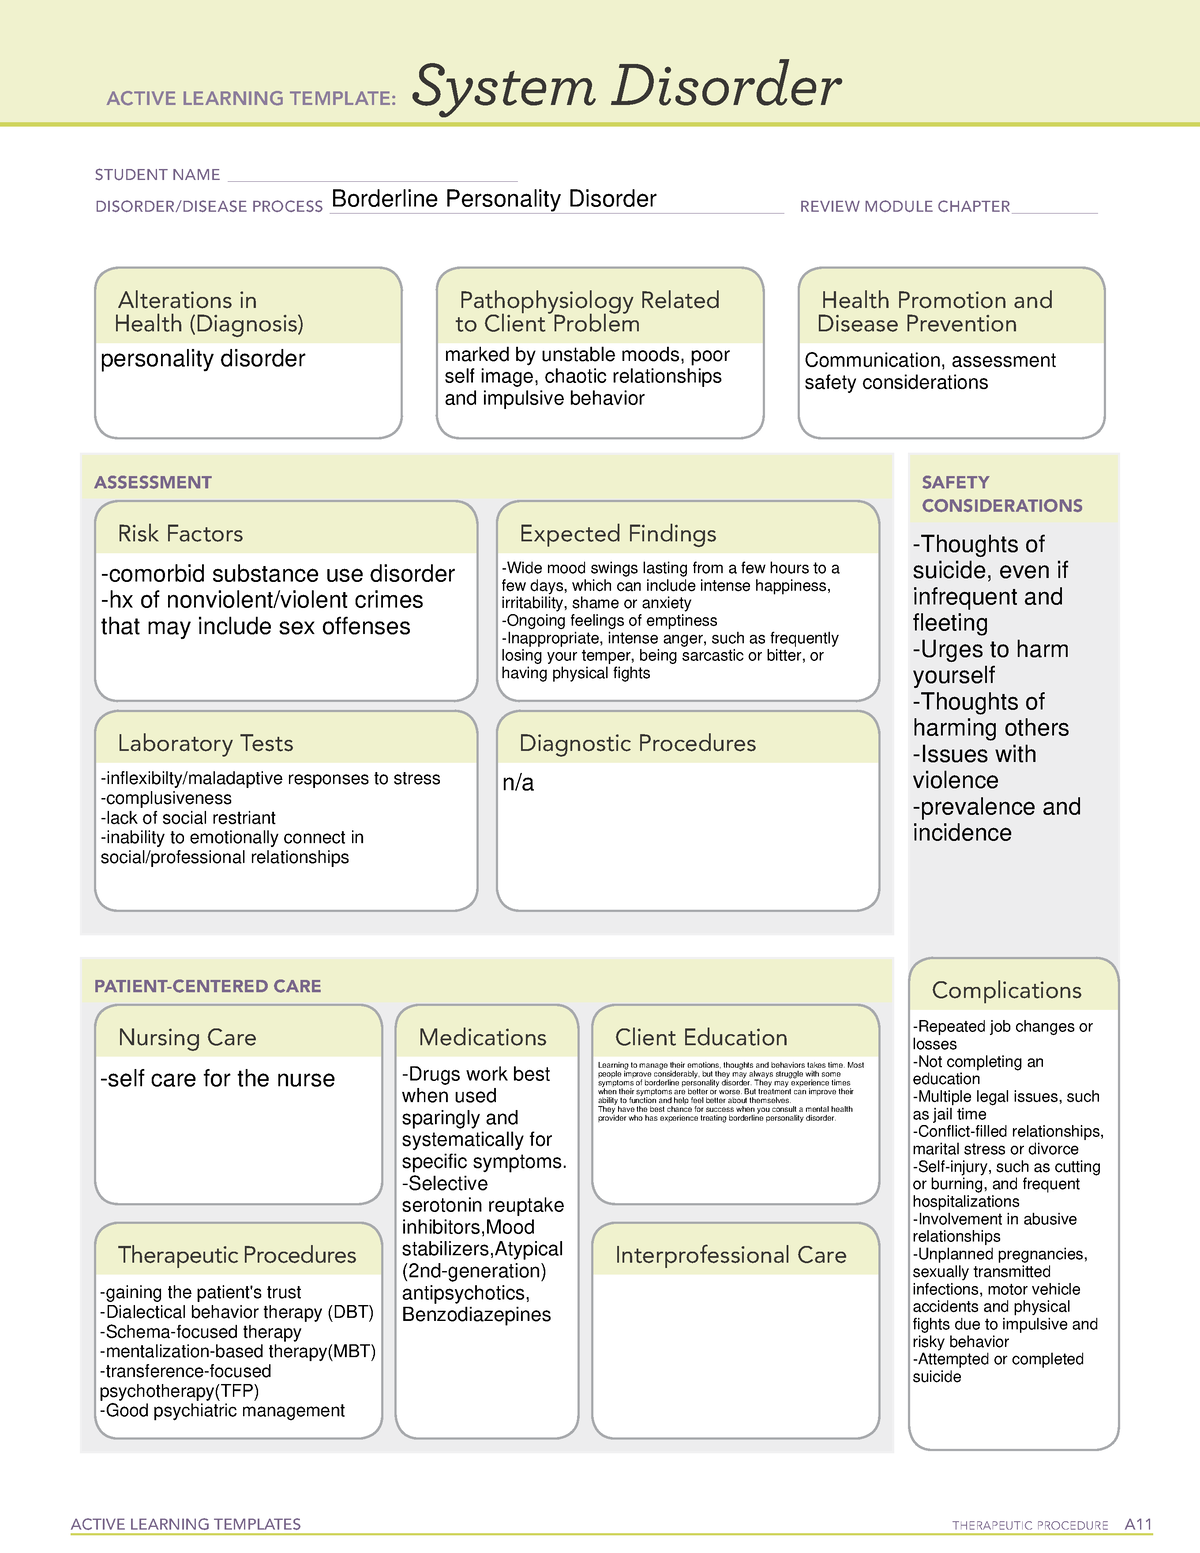 System disorder BPD ATI Active Learning Template ACTIVE LEARNING